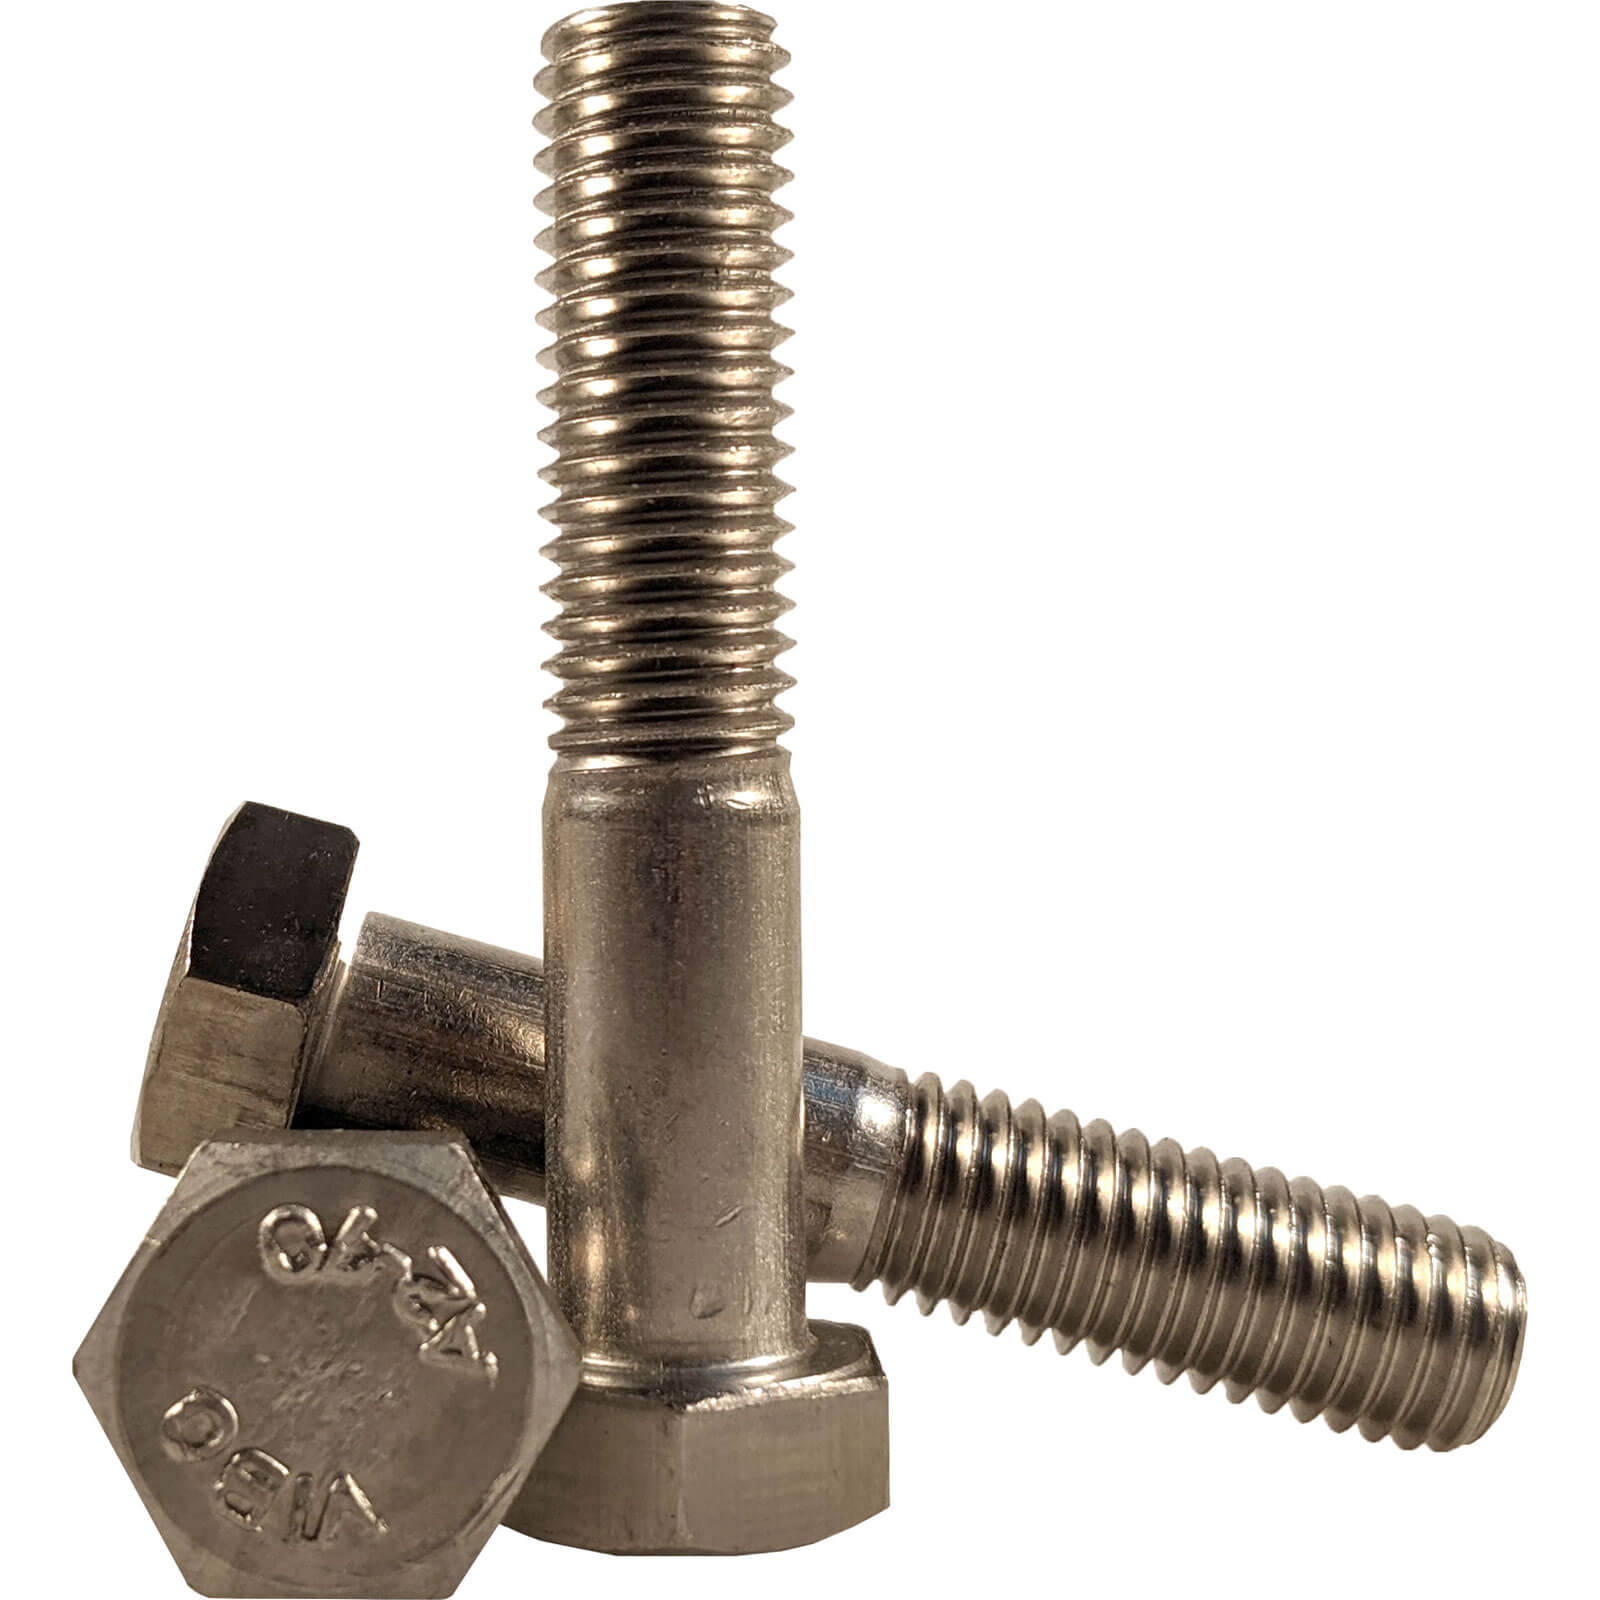 Photos - Nail / Screw / Fastener Sirius Bolts A4 316 Stainless Steel M6 45mm Pack of 1 